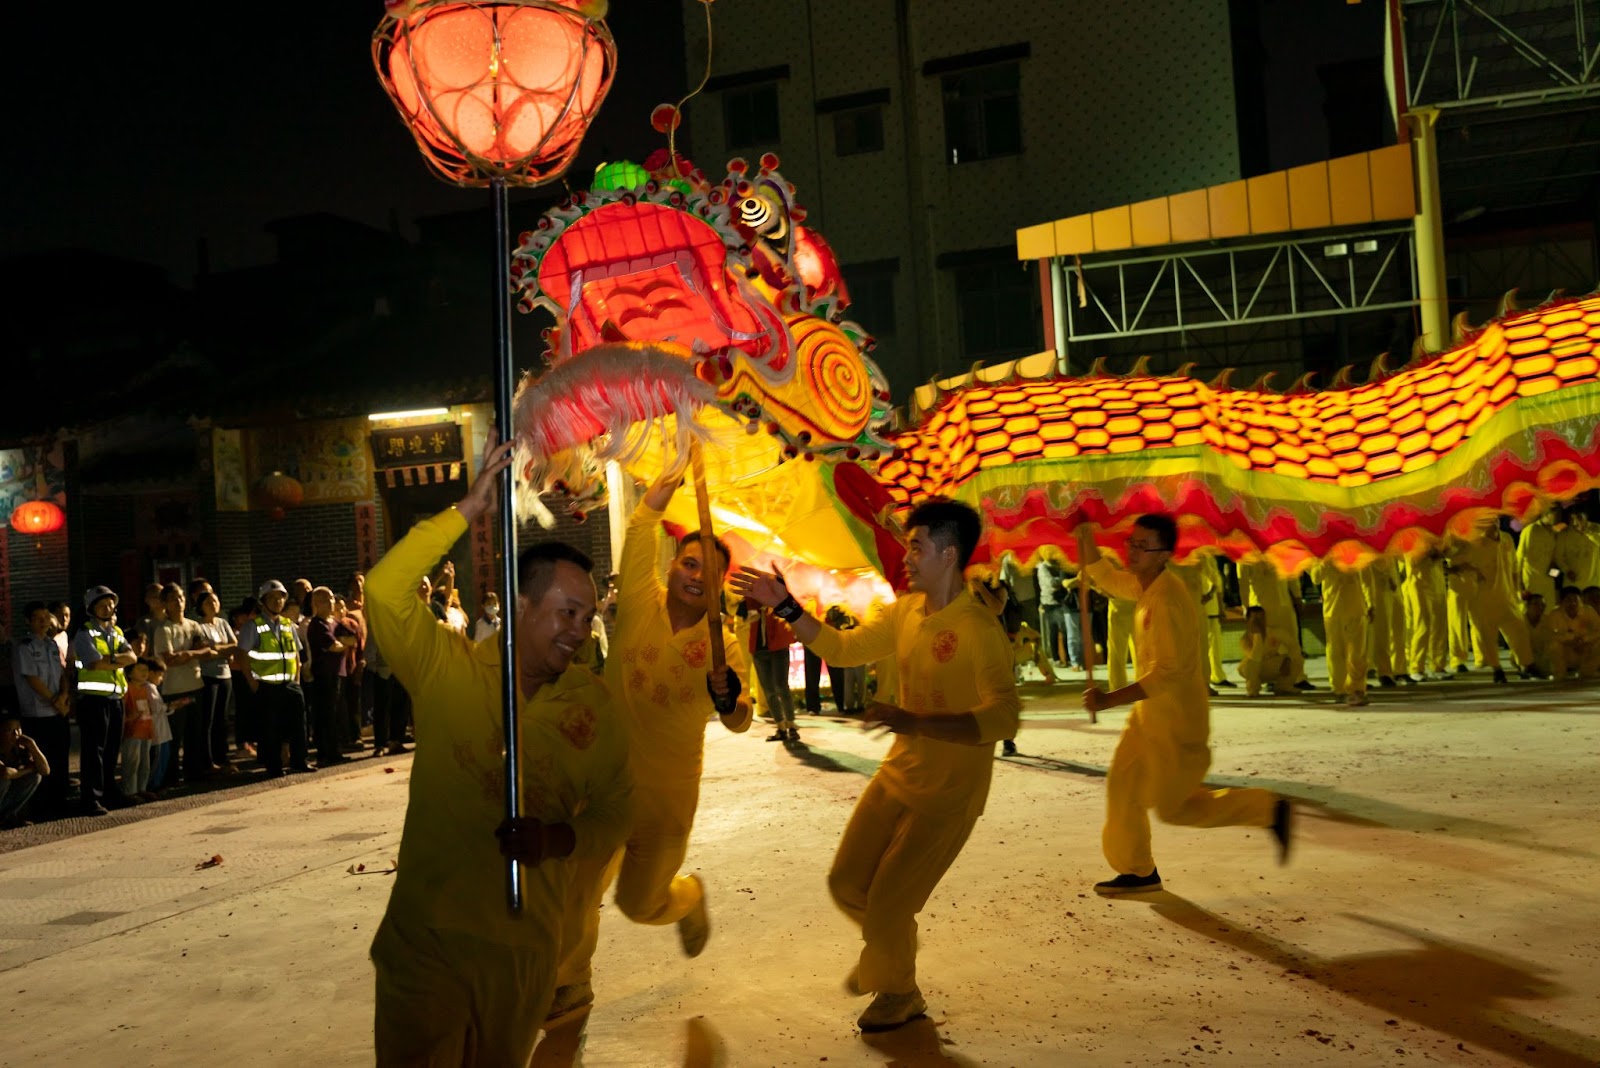 The Dragon Dance is one of the most emblematic events of the Spring Festival